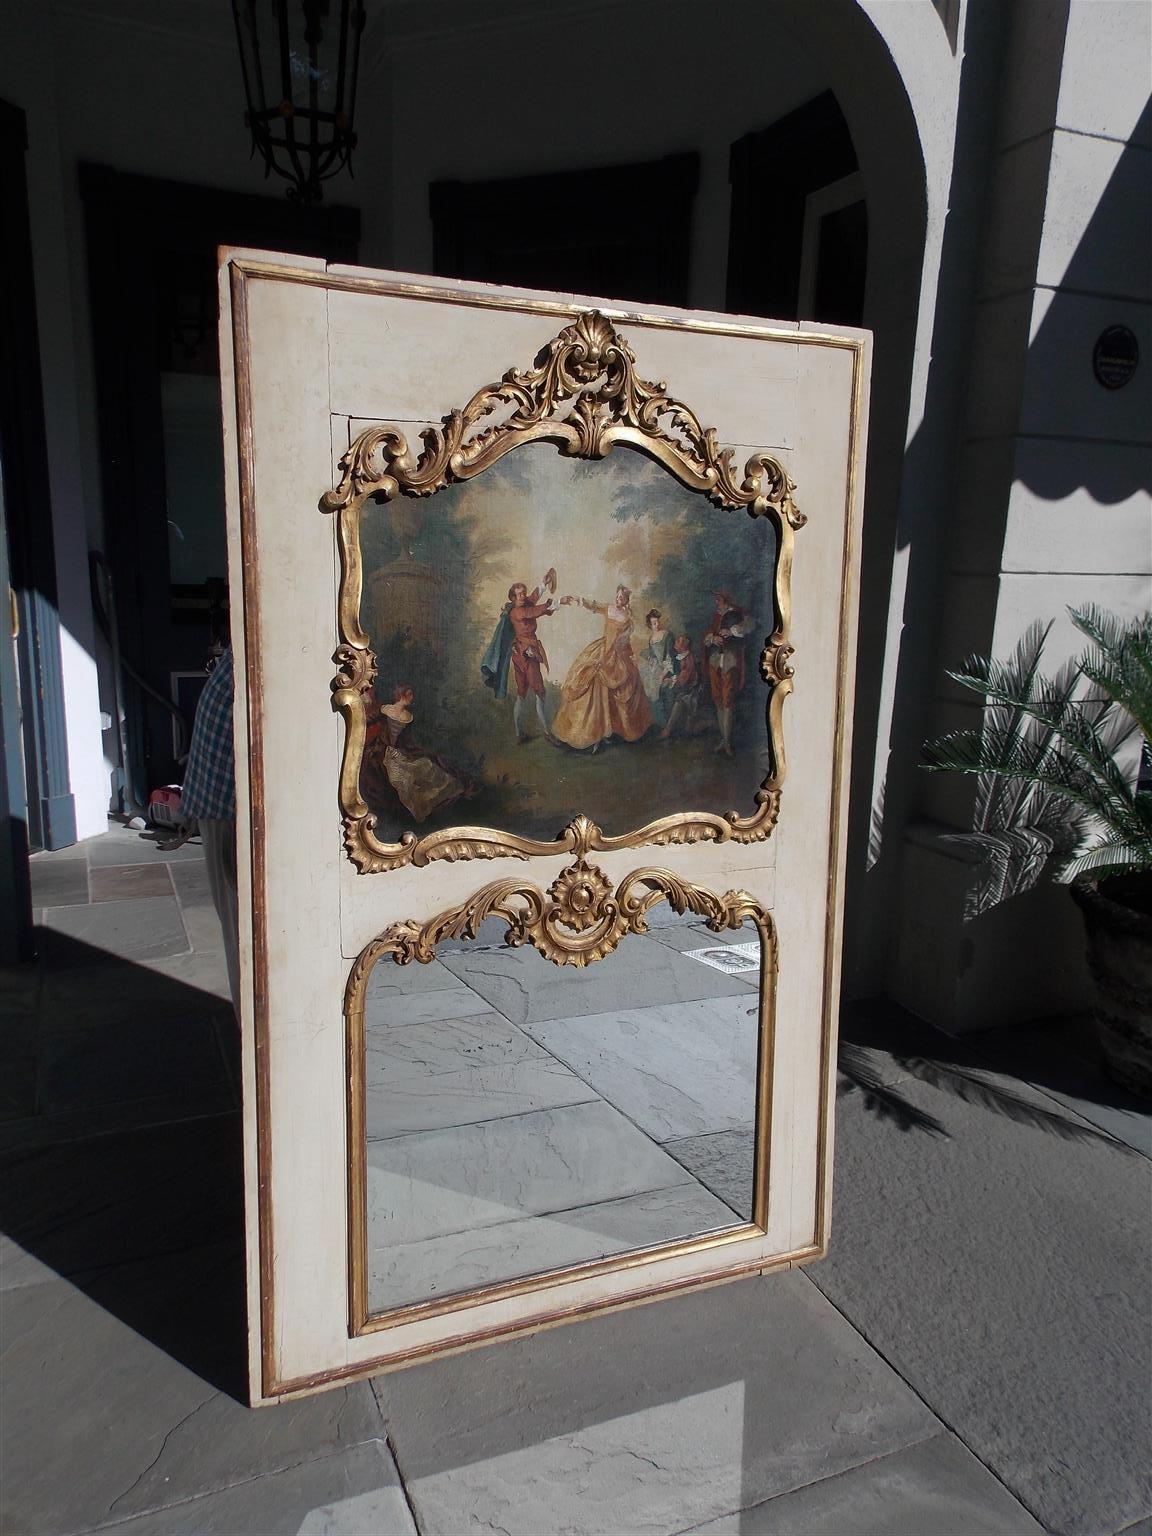 French Louis XV gilt and painted trumeau mirror with a figural landscape painting, embellished shells, foliate scrolls, and retains the original shaped mirror with surrounding gilt foliage. The mirror retains the original paneled wood backing as